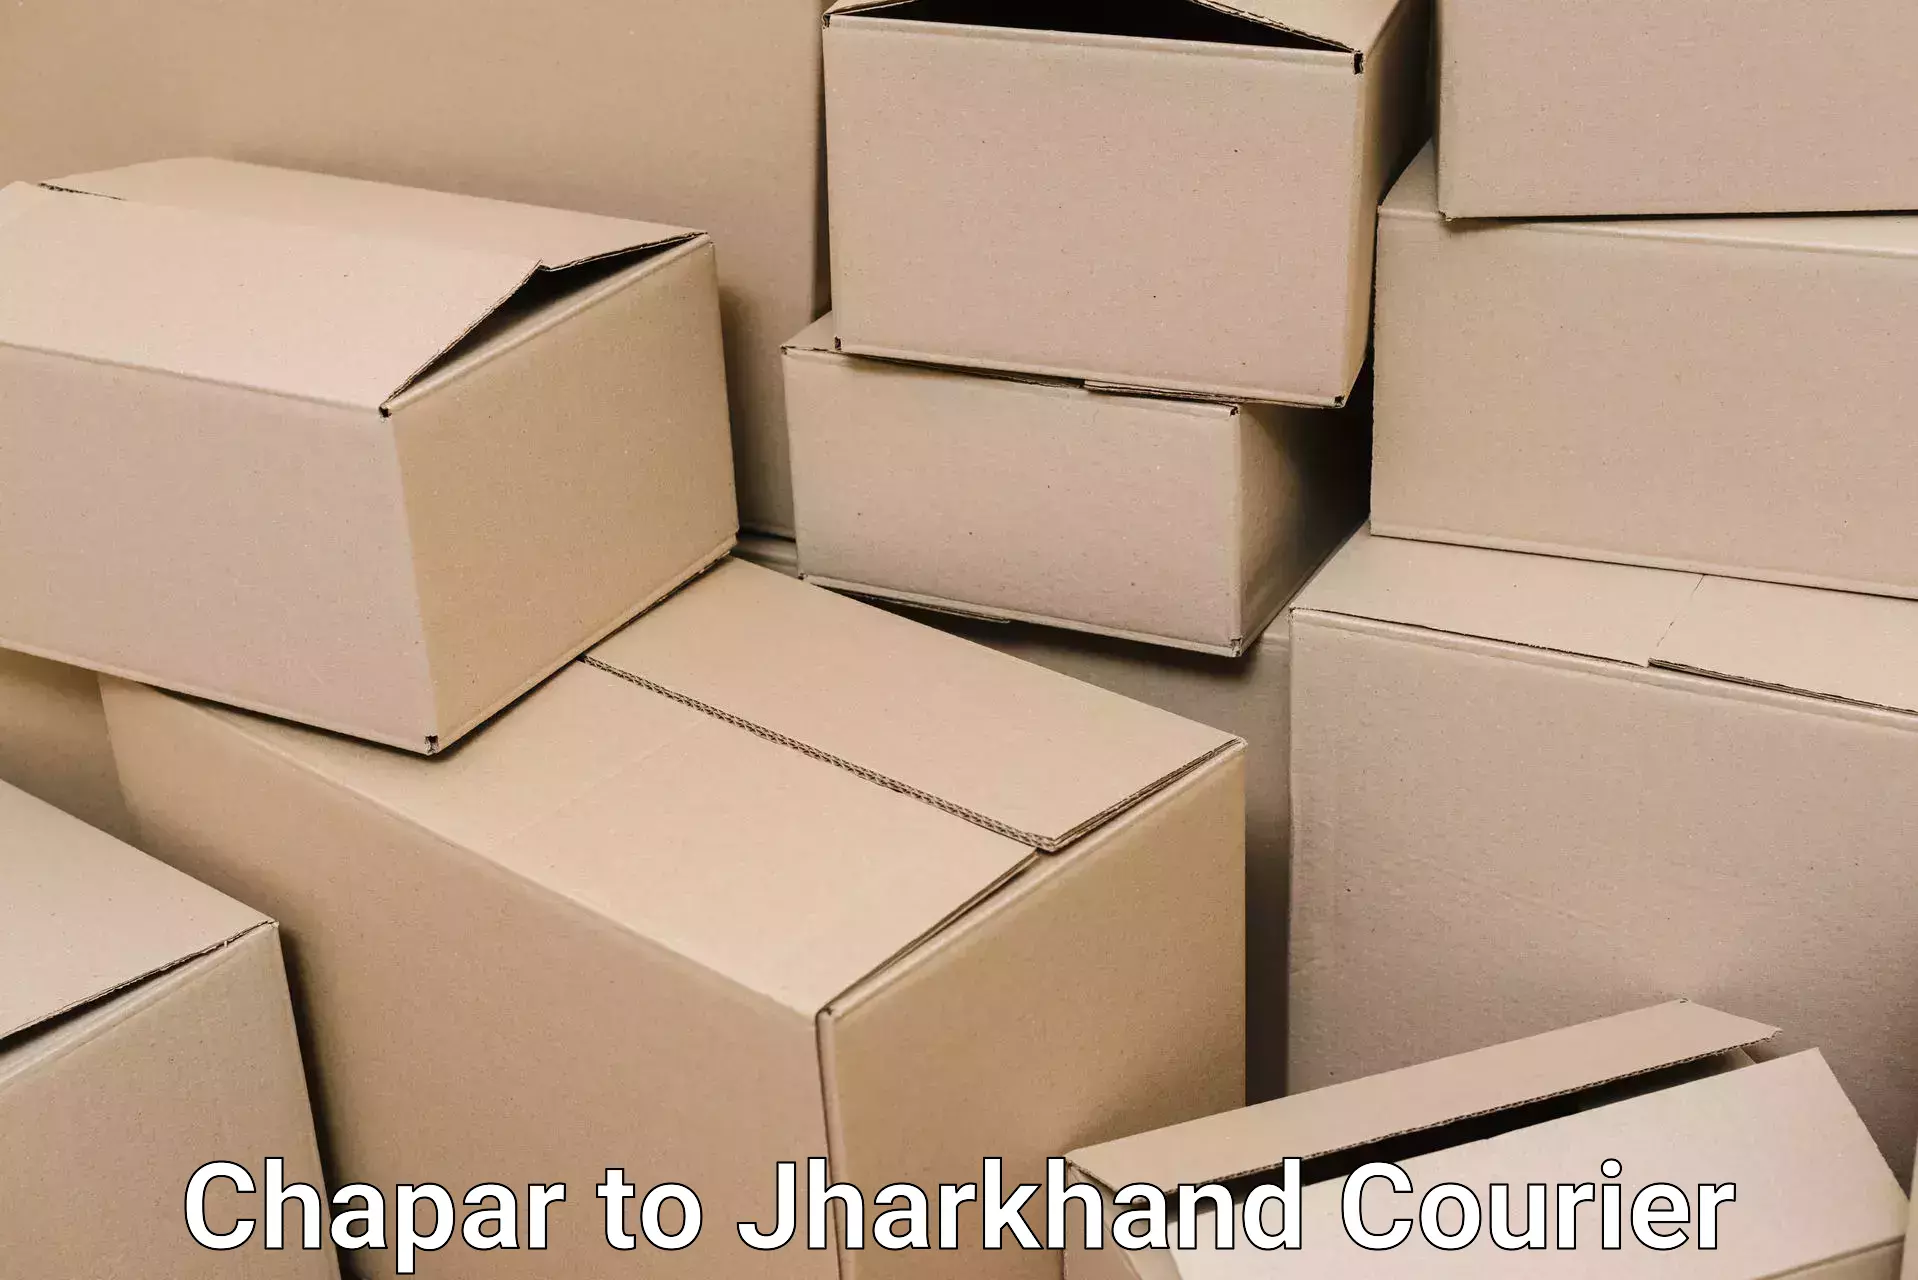 Efficient furniture movers in Chapar to Godabar Chatra